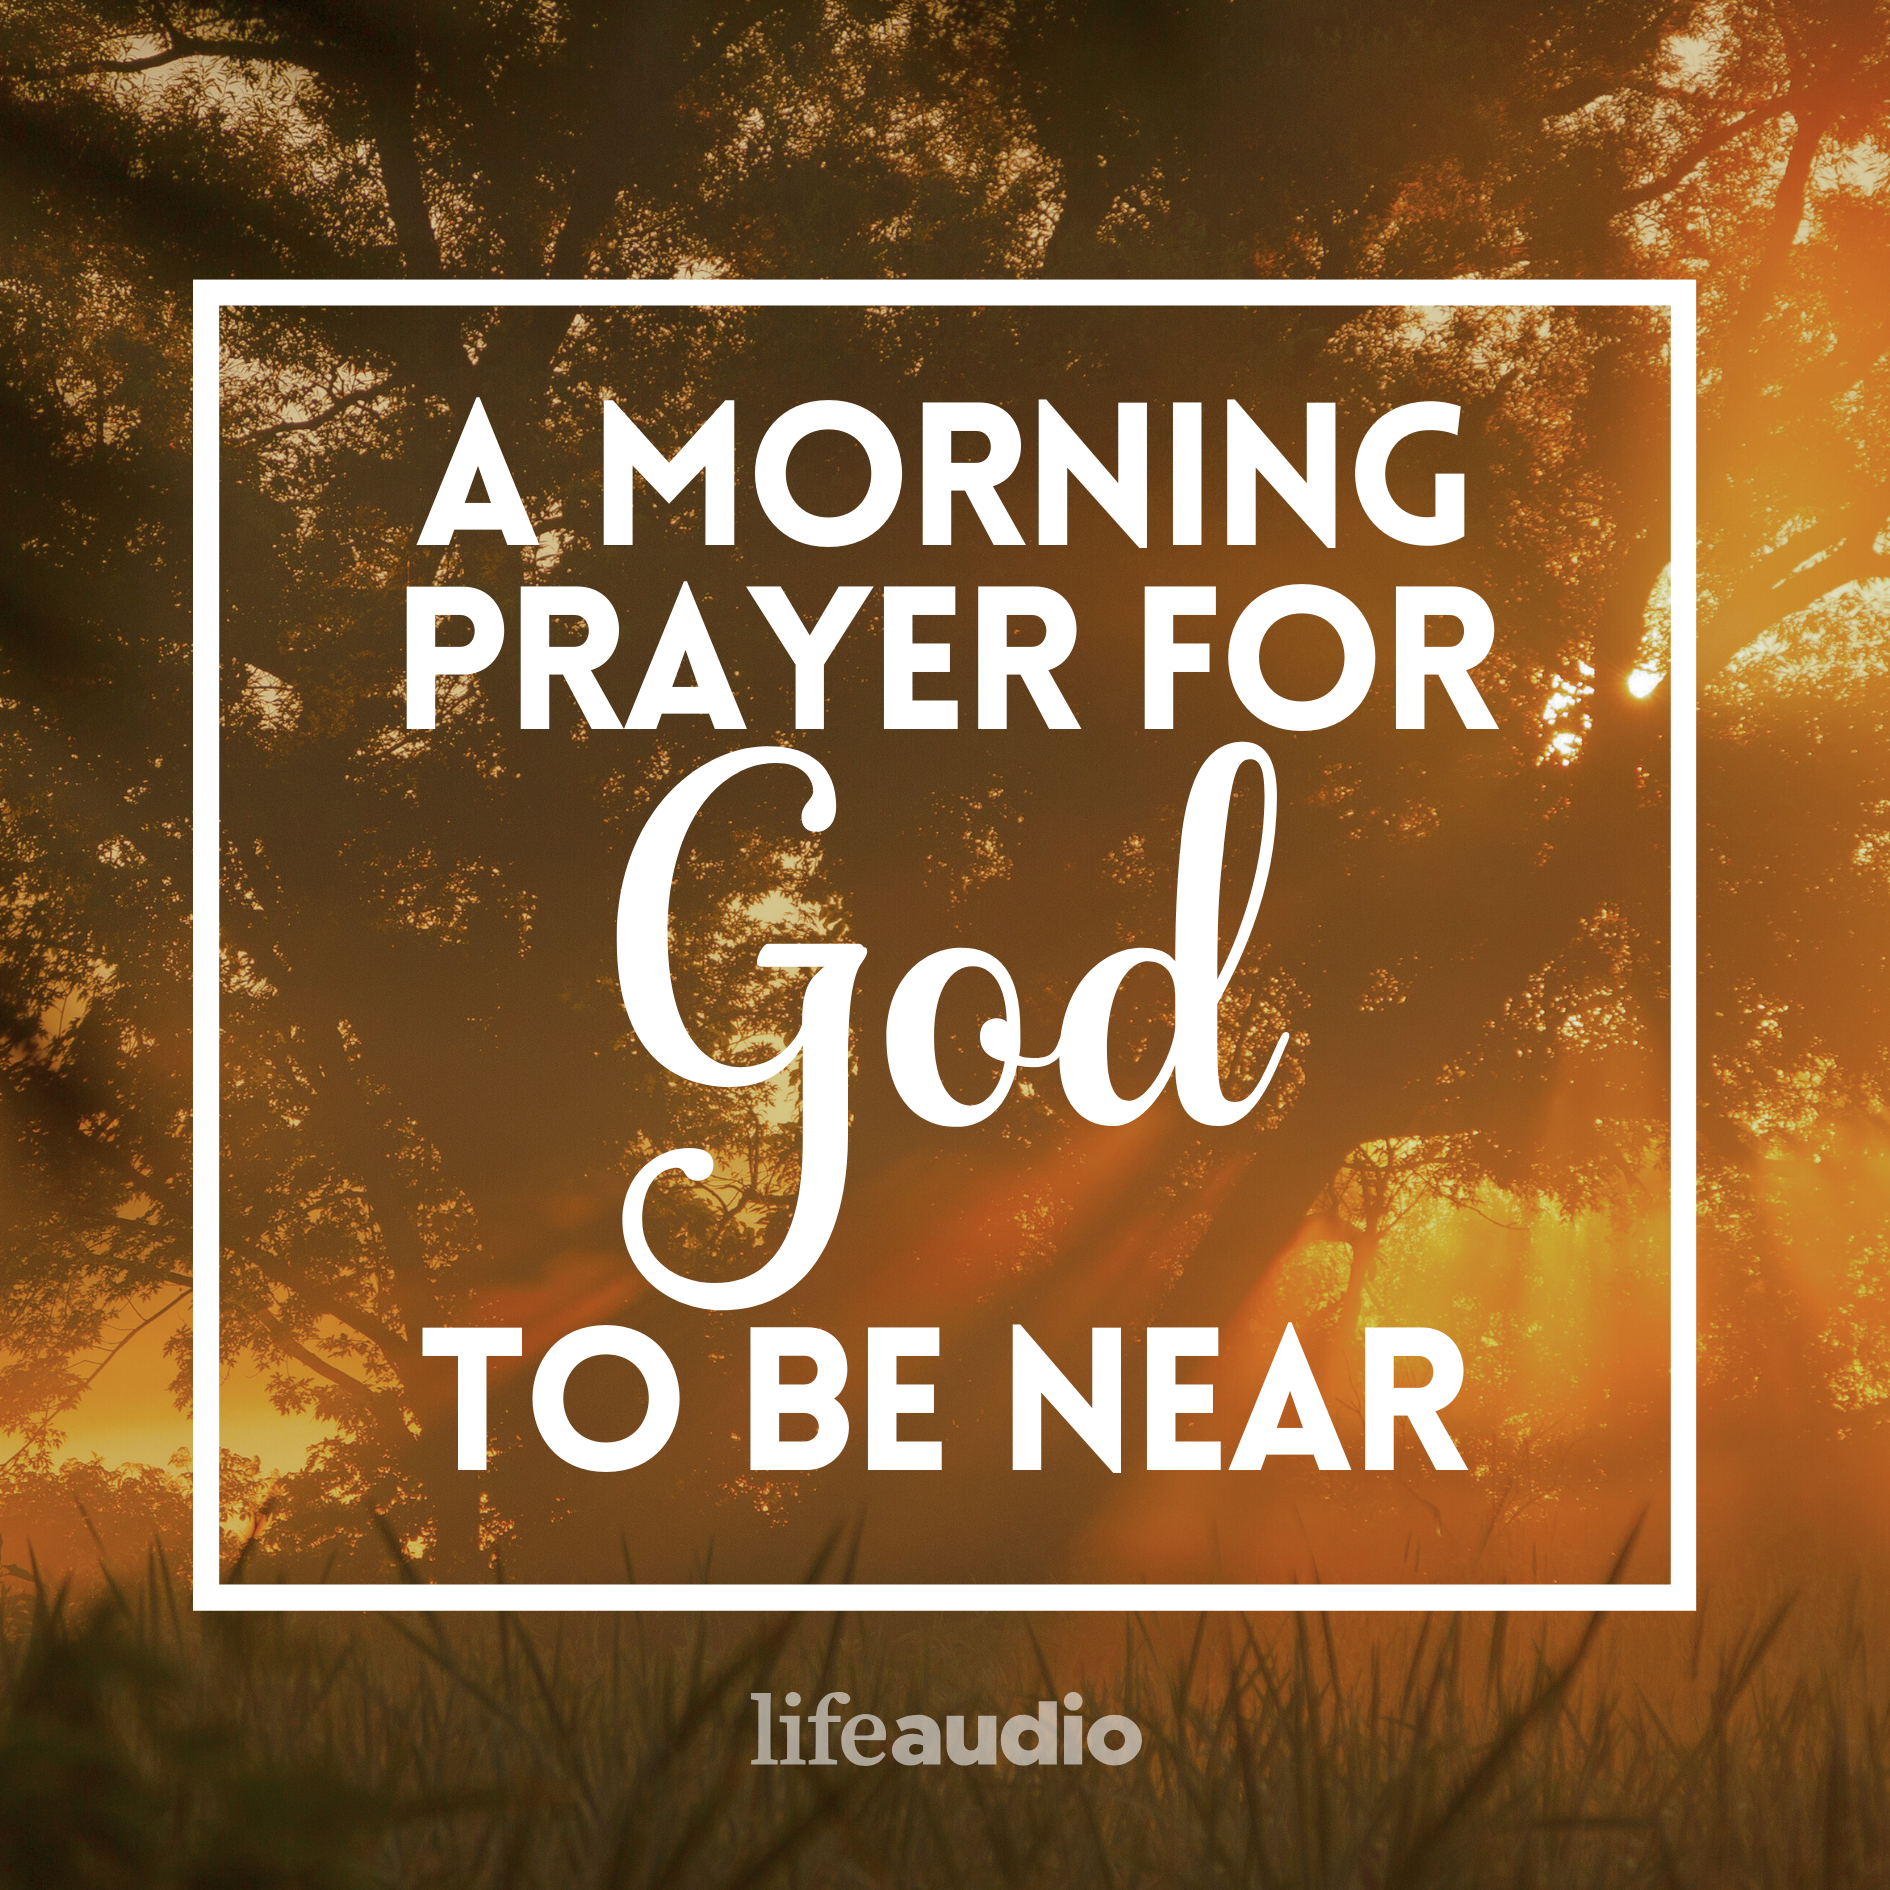 A Morning Prayer for God to Be Near